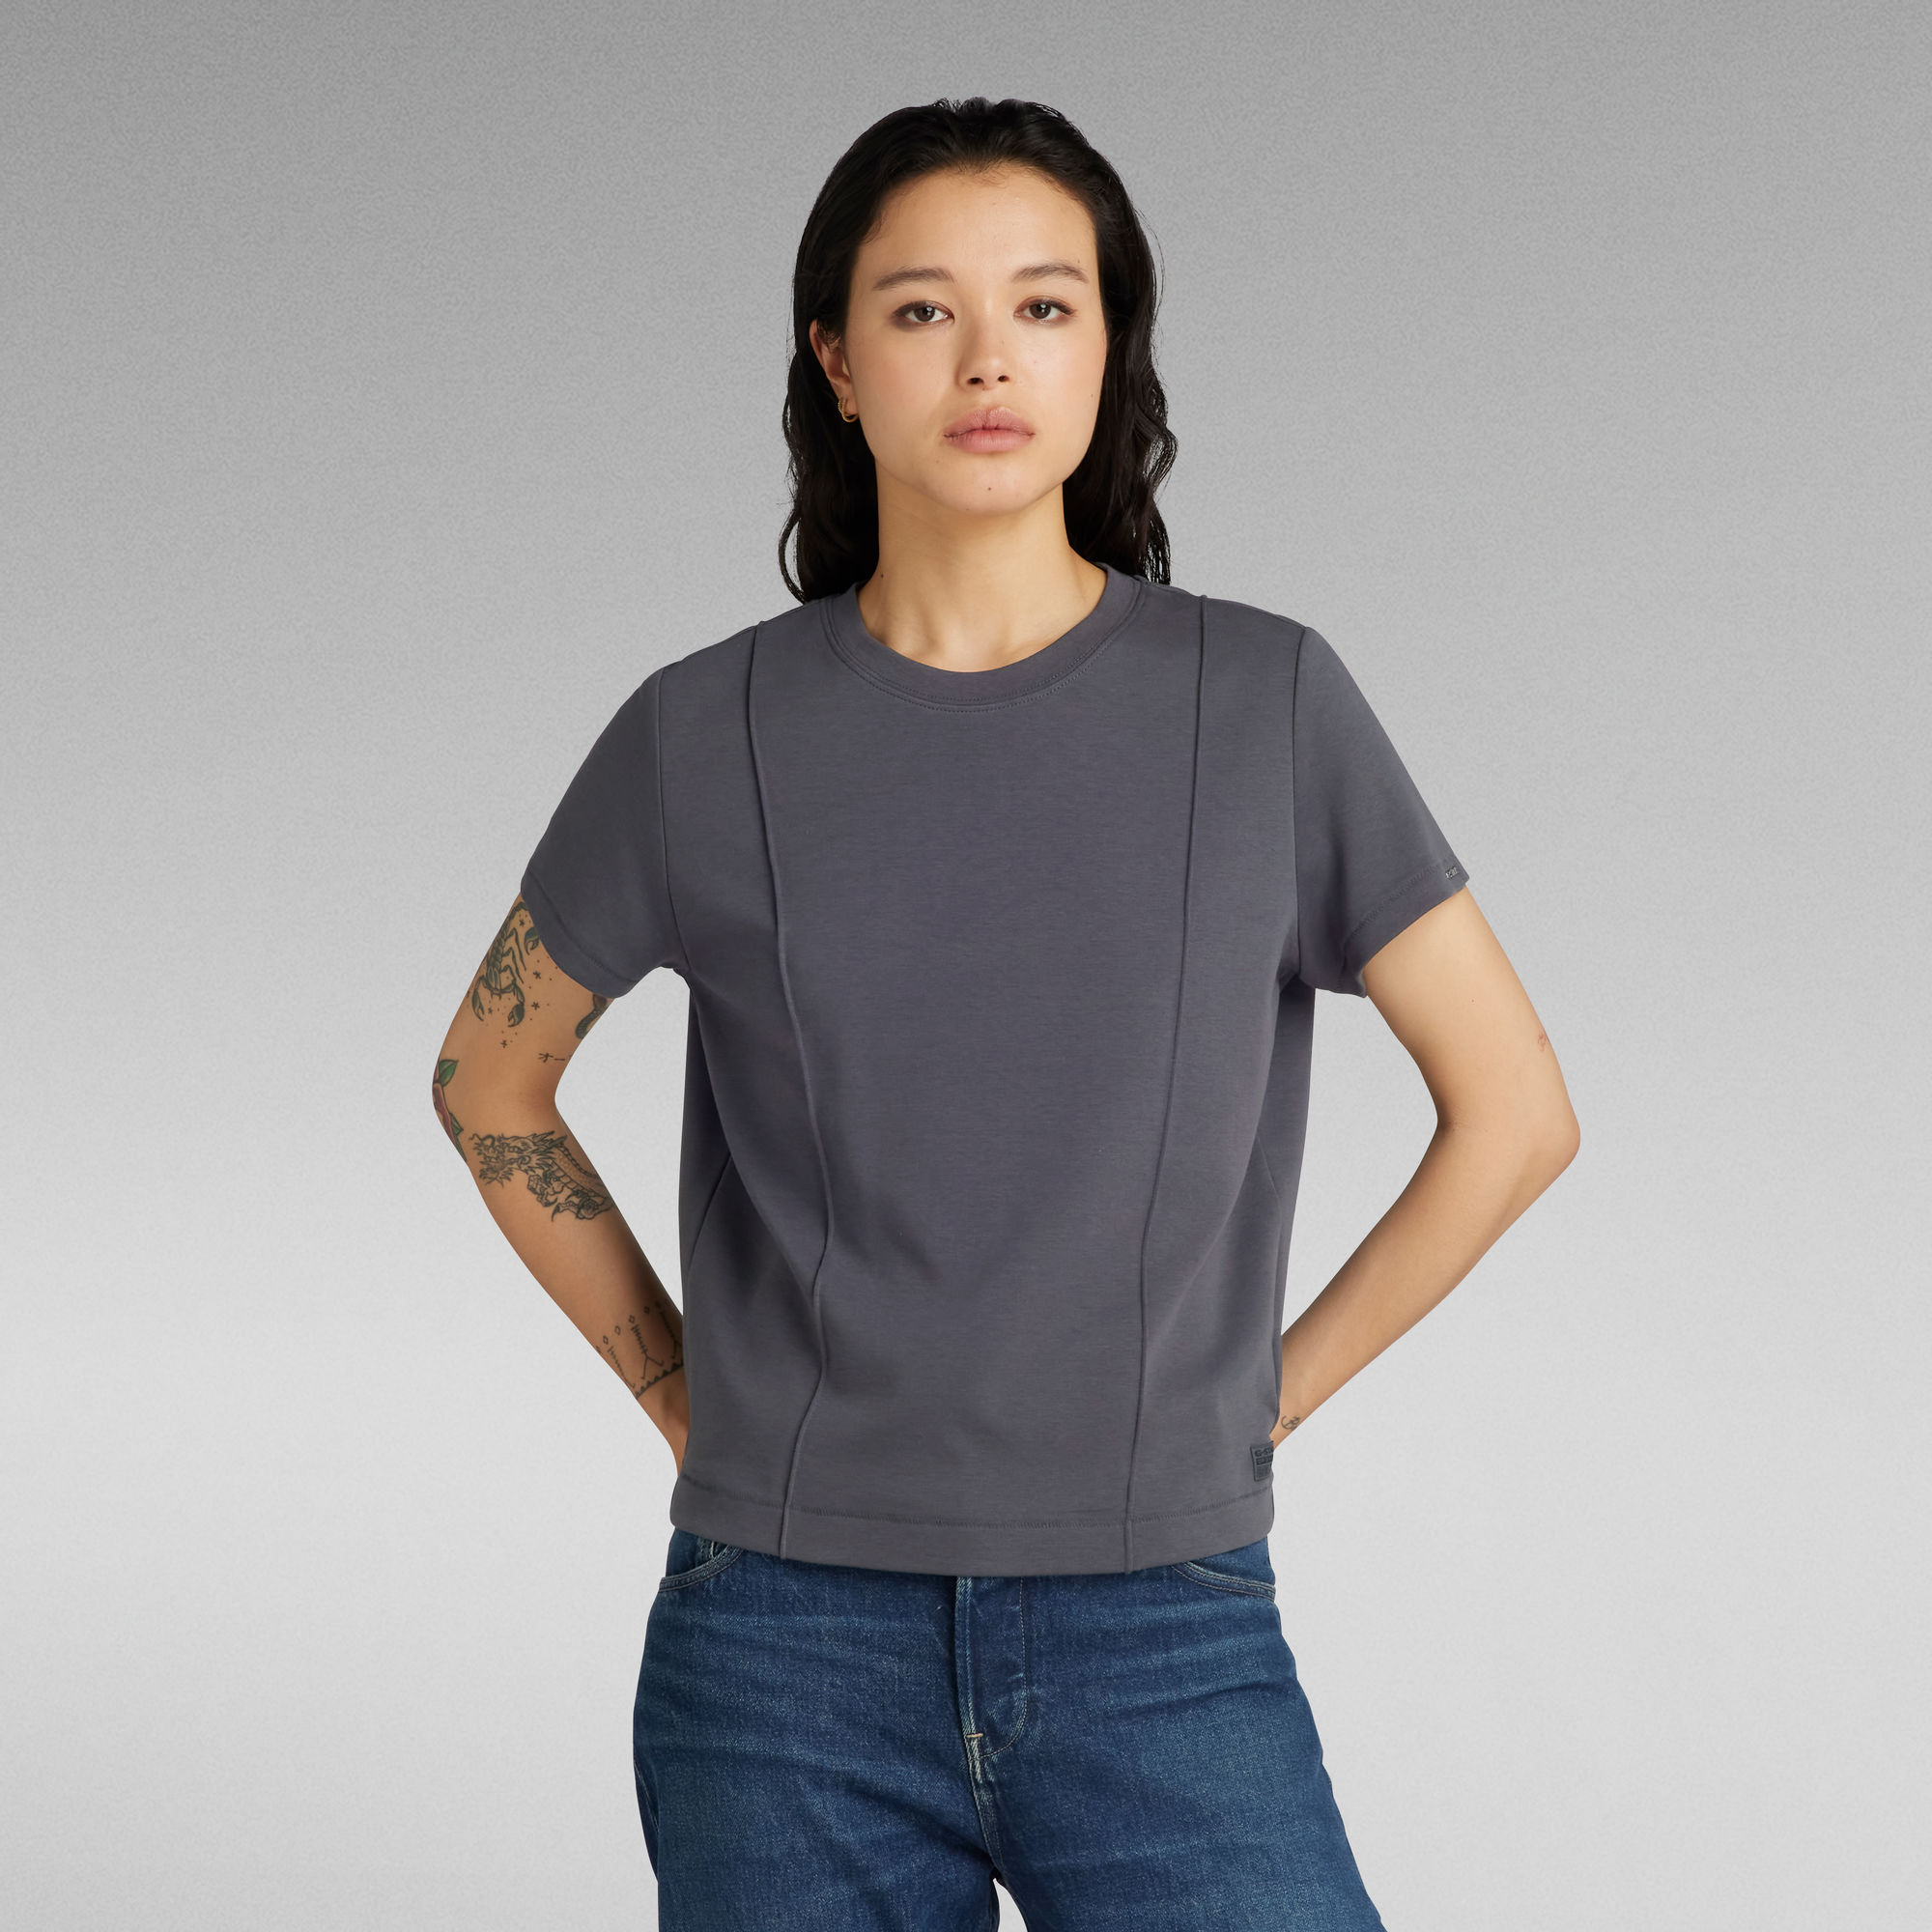 G-Star RAW Pintucked Tapered Top Grijs Dames